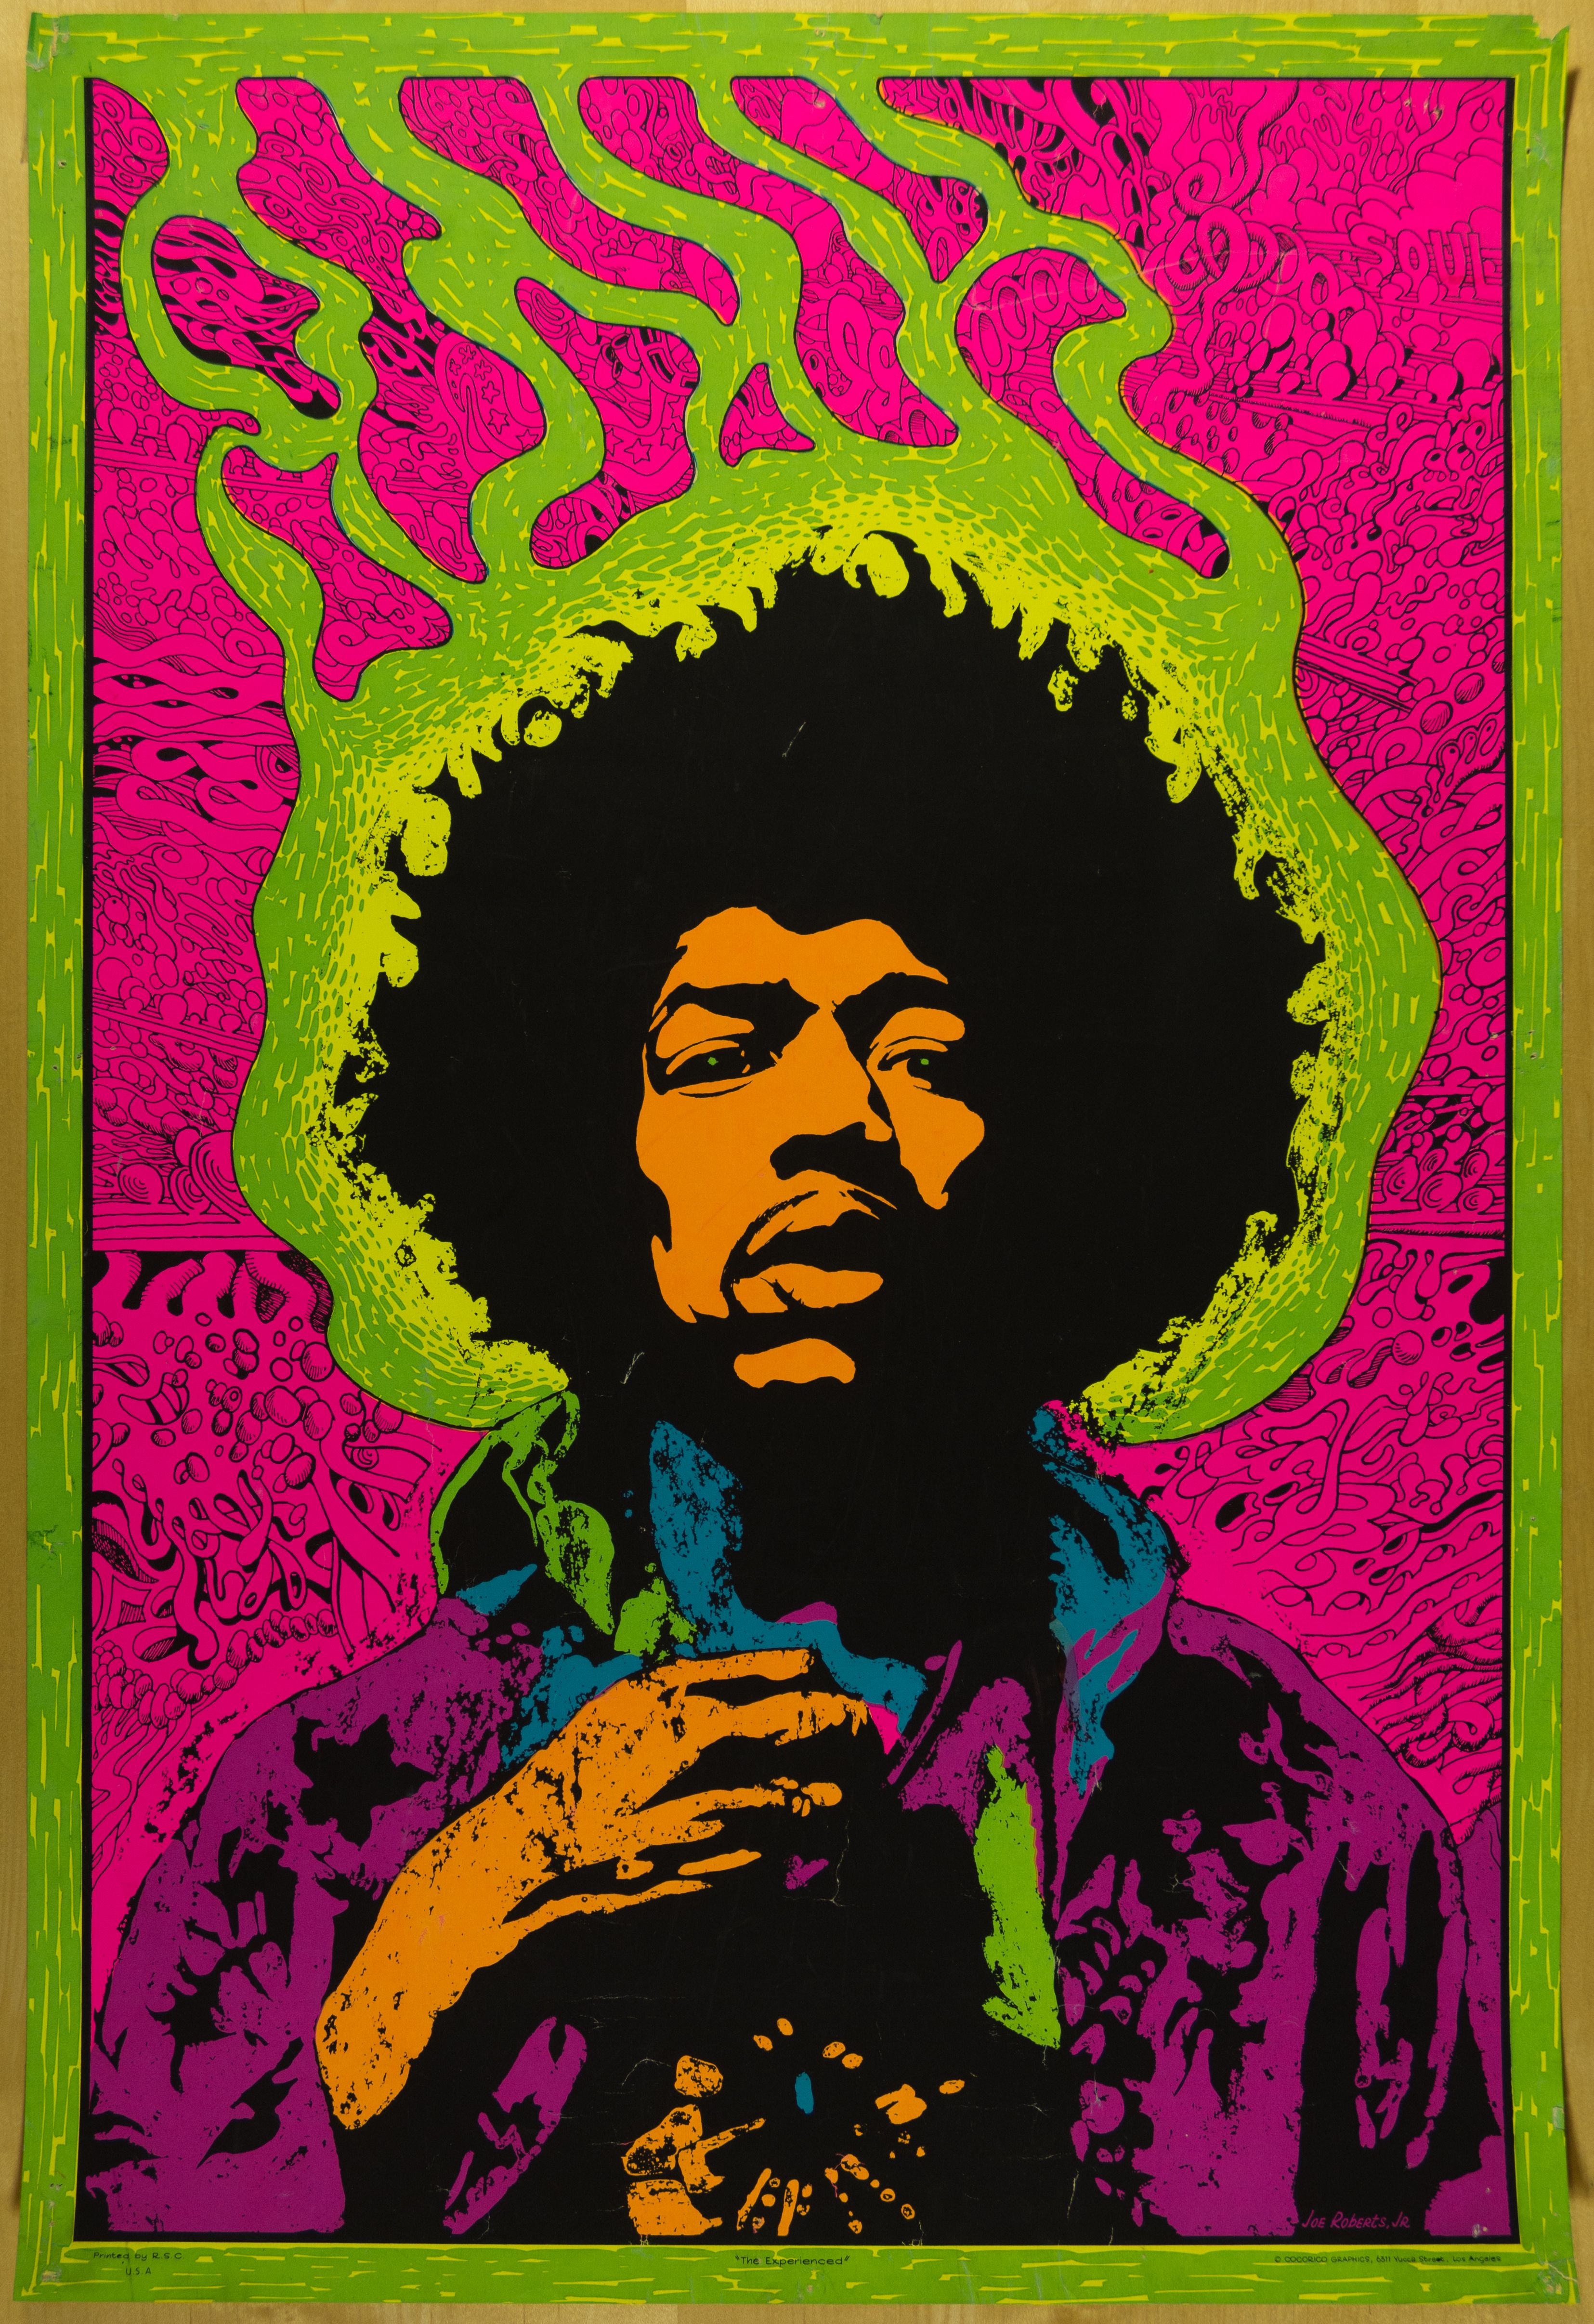 Jimi Hendrix "The Experienced" 1969 Headshop Poster Concert Poster